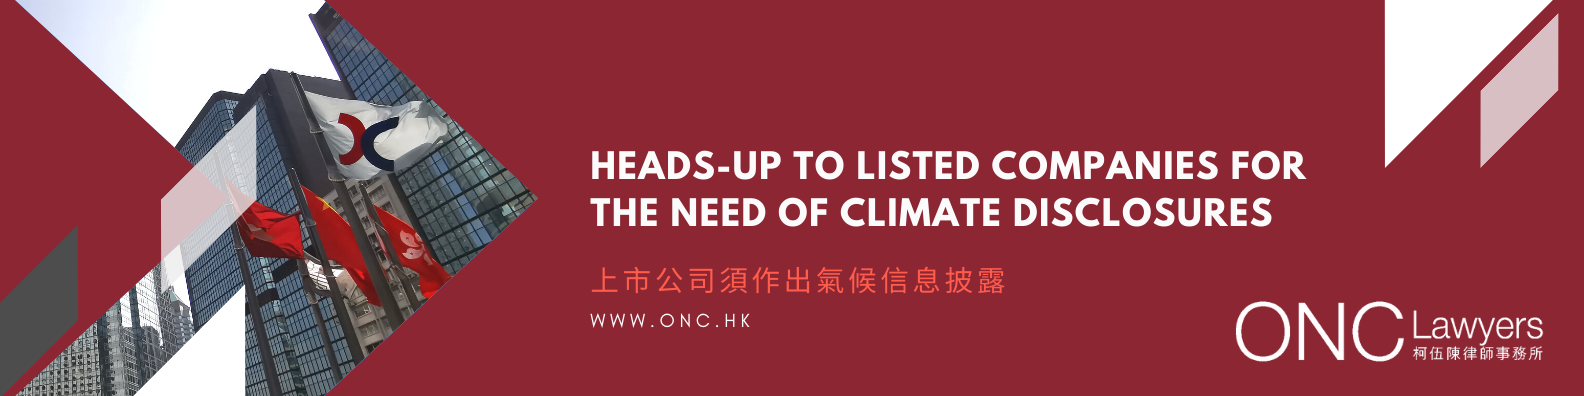 Heads-up to listed companies for the need of climate disclosures